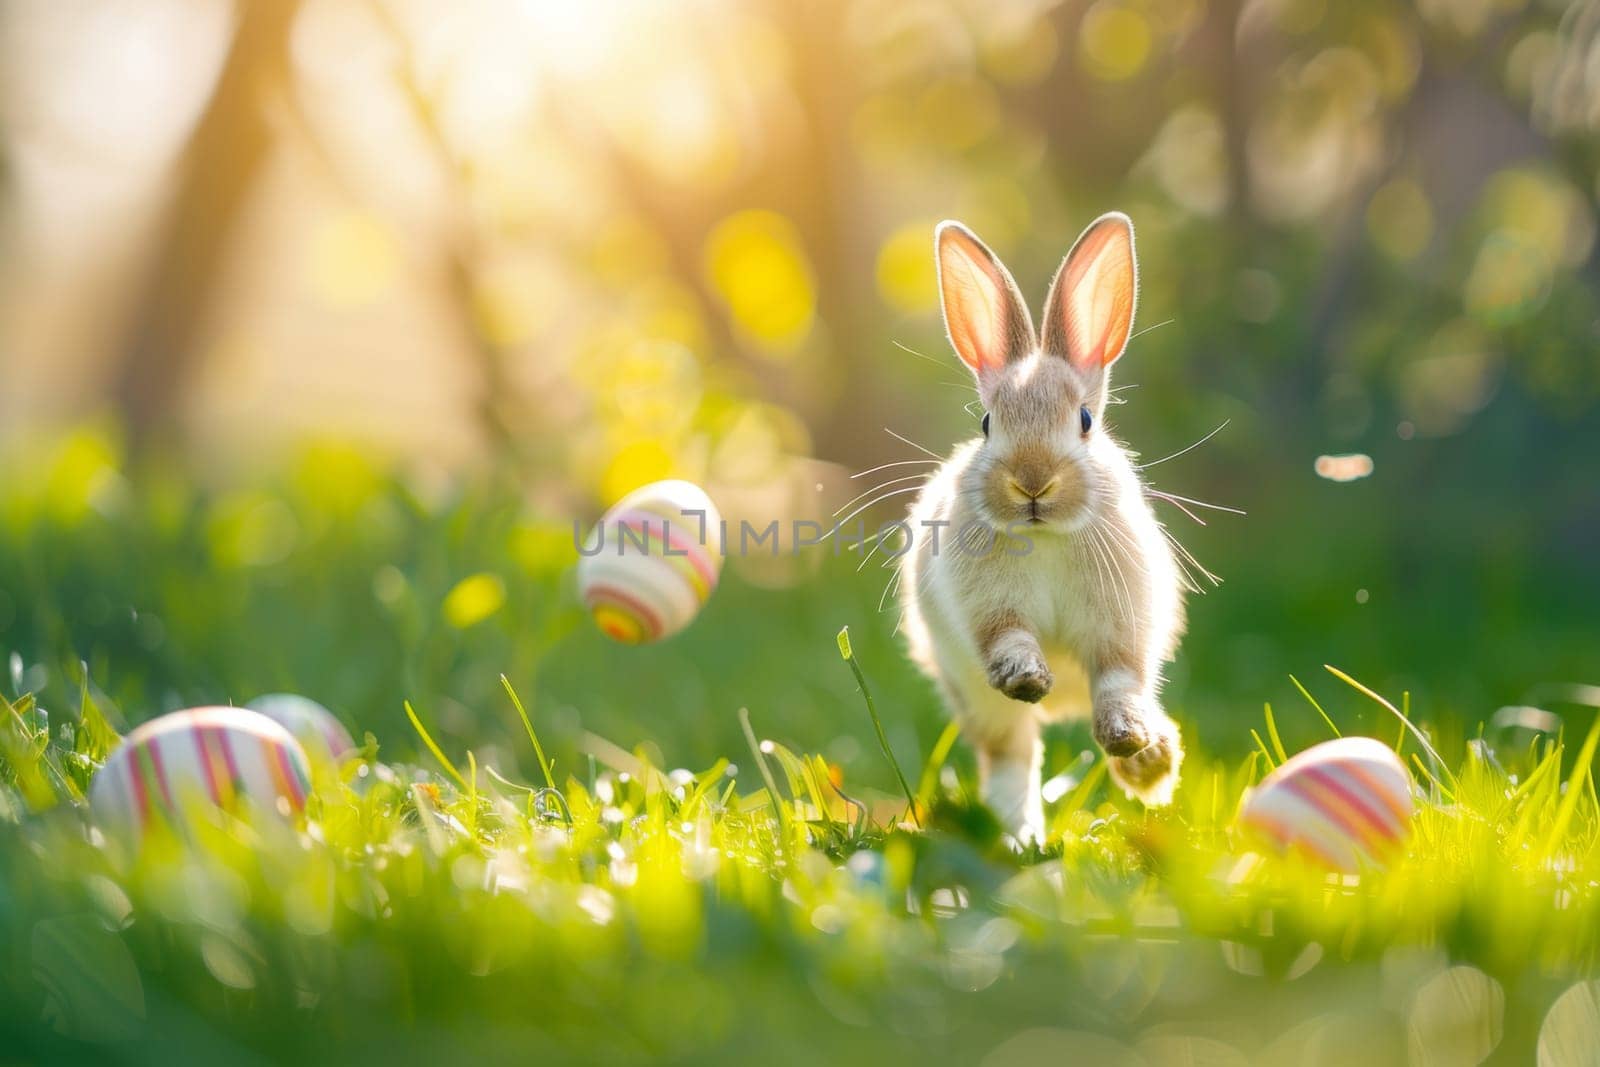 A rabbit is running through a field of grass with a few eggs scattered around it. The scene is peaceful and serene, with the rabbit's movements creating a sense of motion and energy